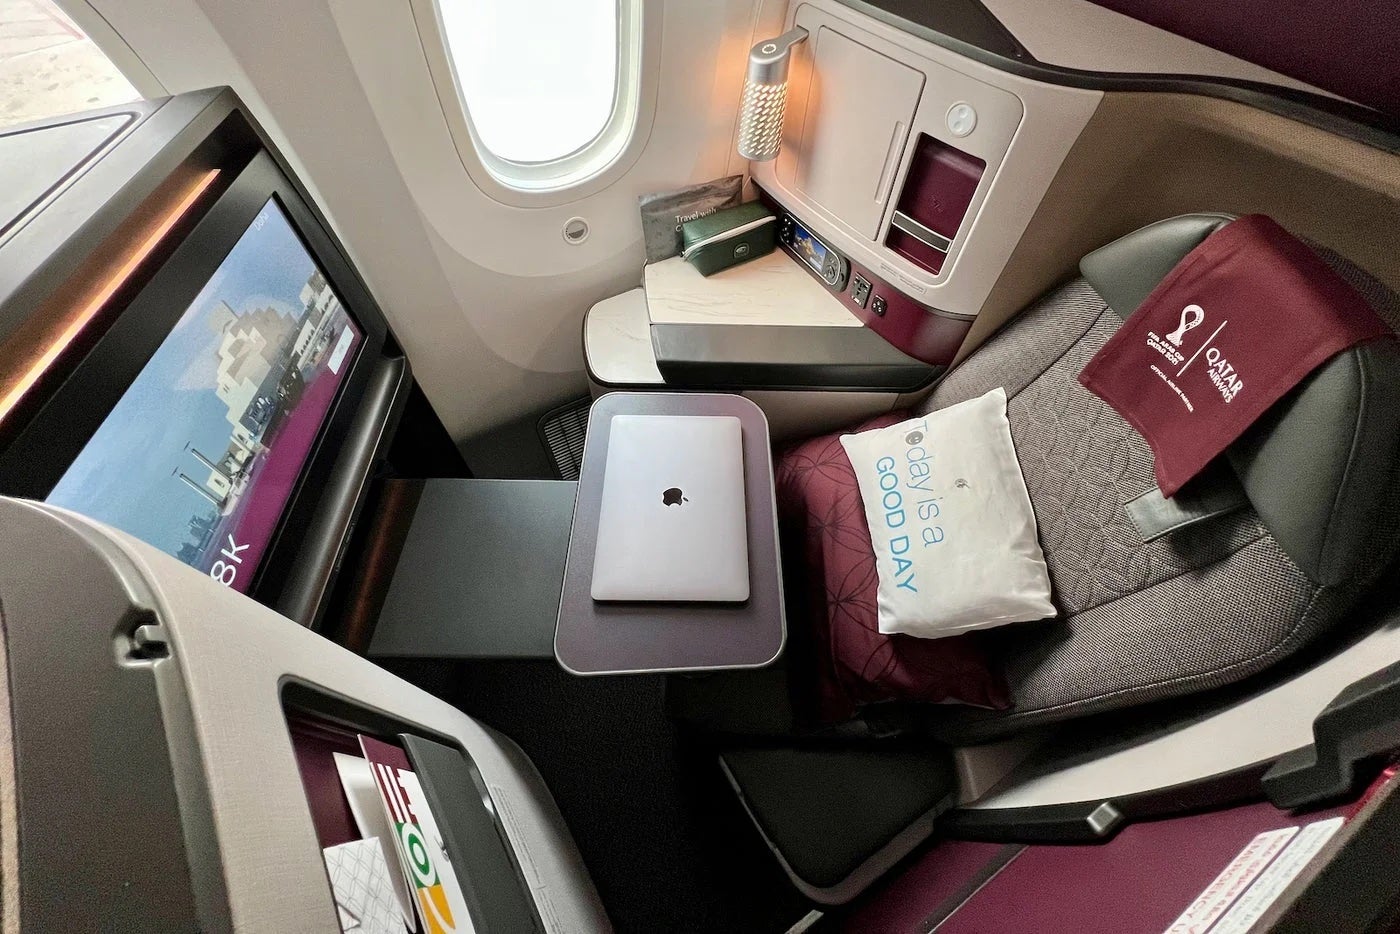 Ranked: The best and worst airlines for business class travel